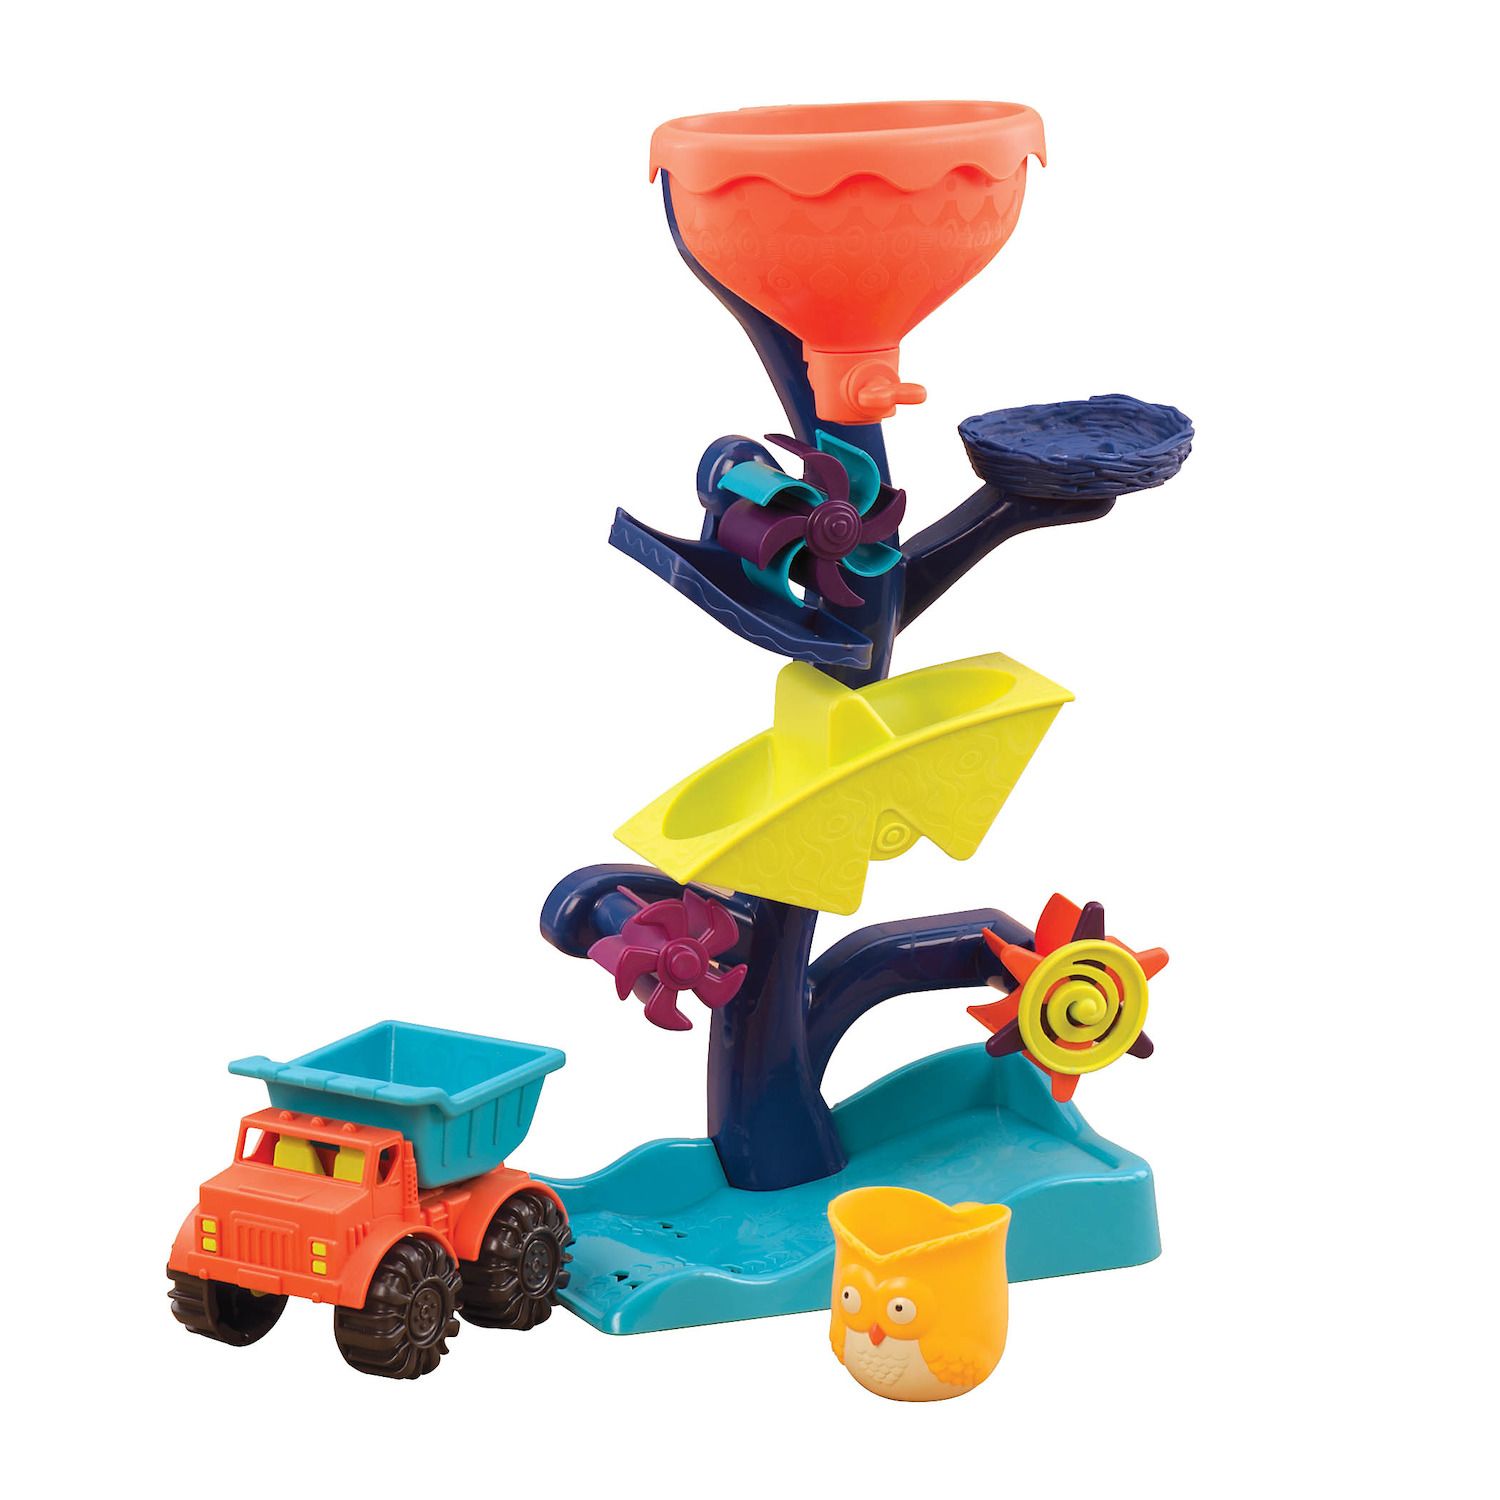 sand and water wheel toy